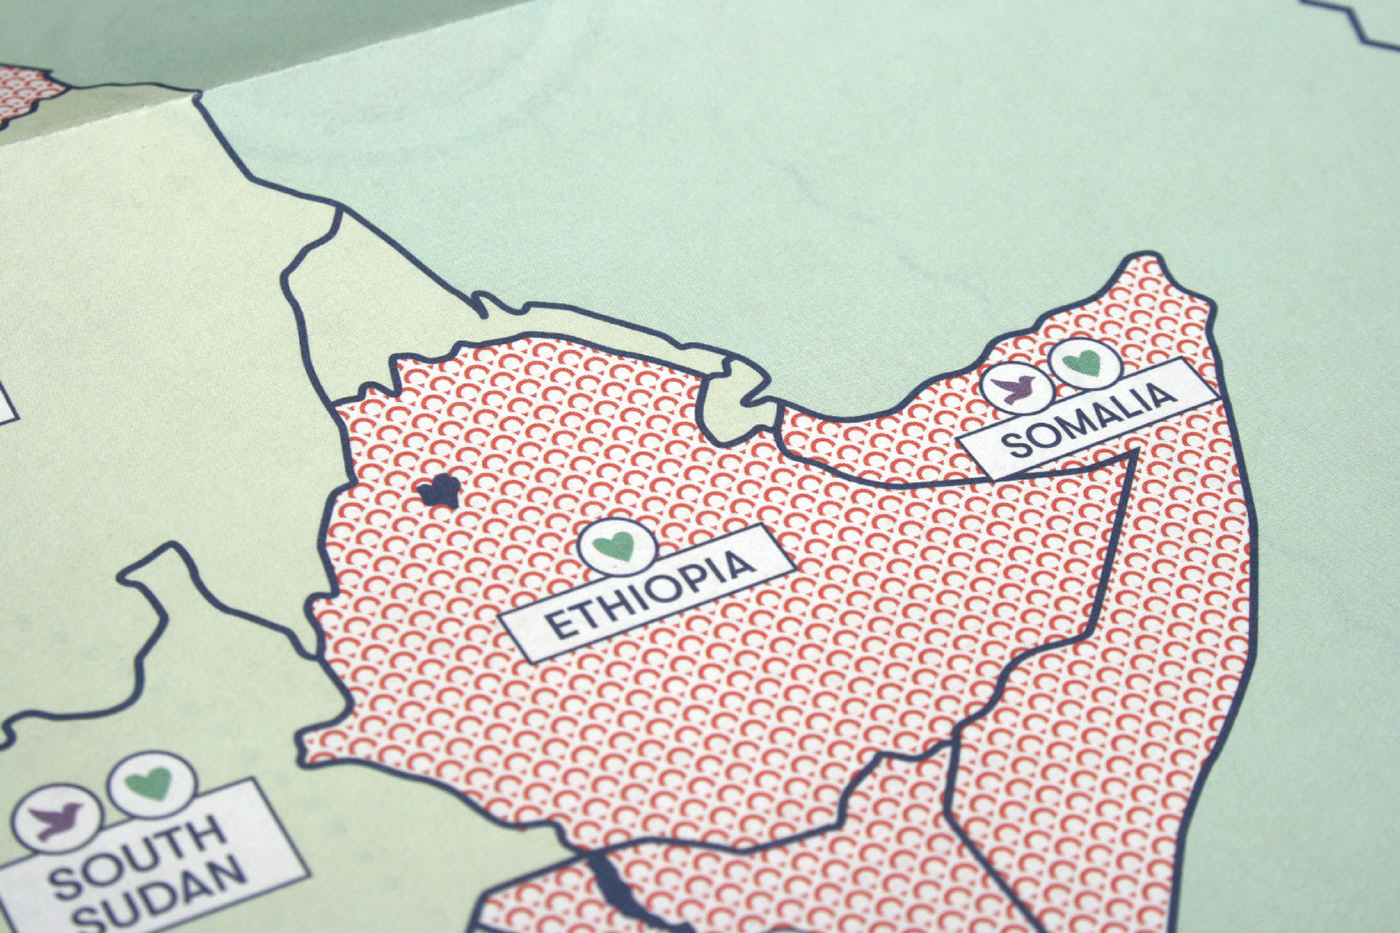 infographic africa leaflet map swiss design